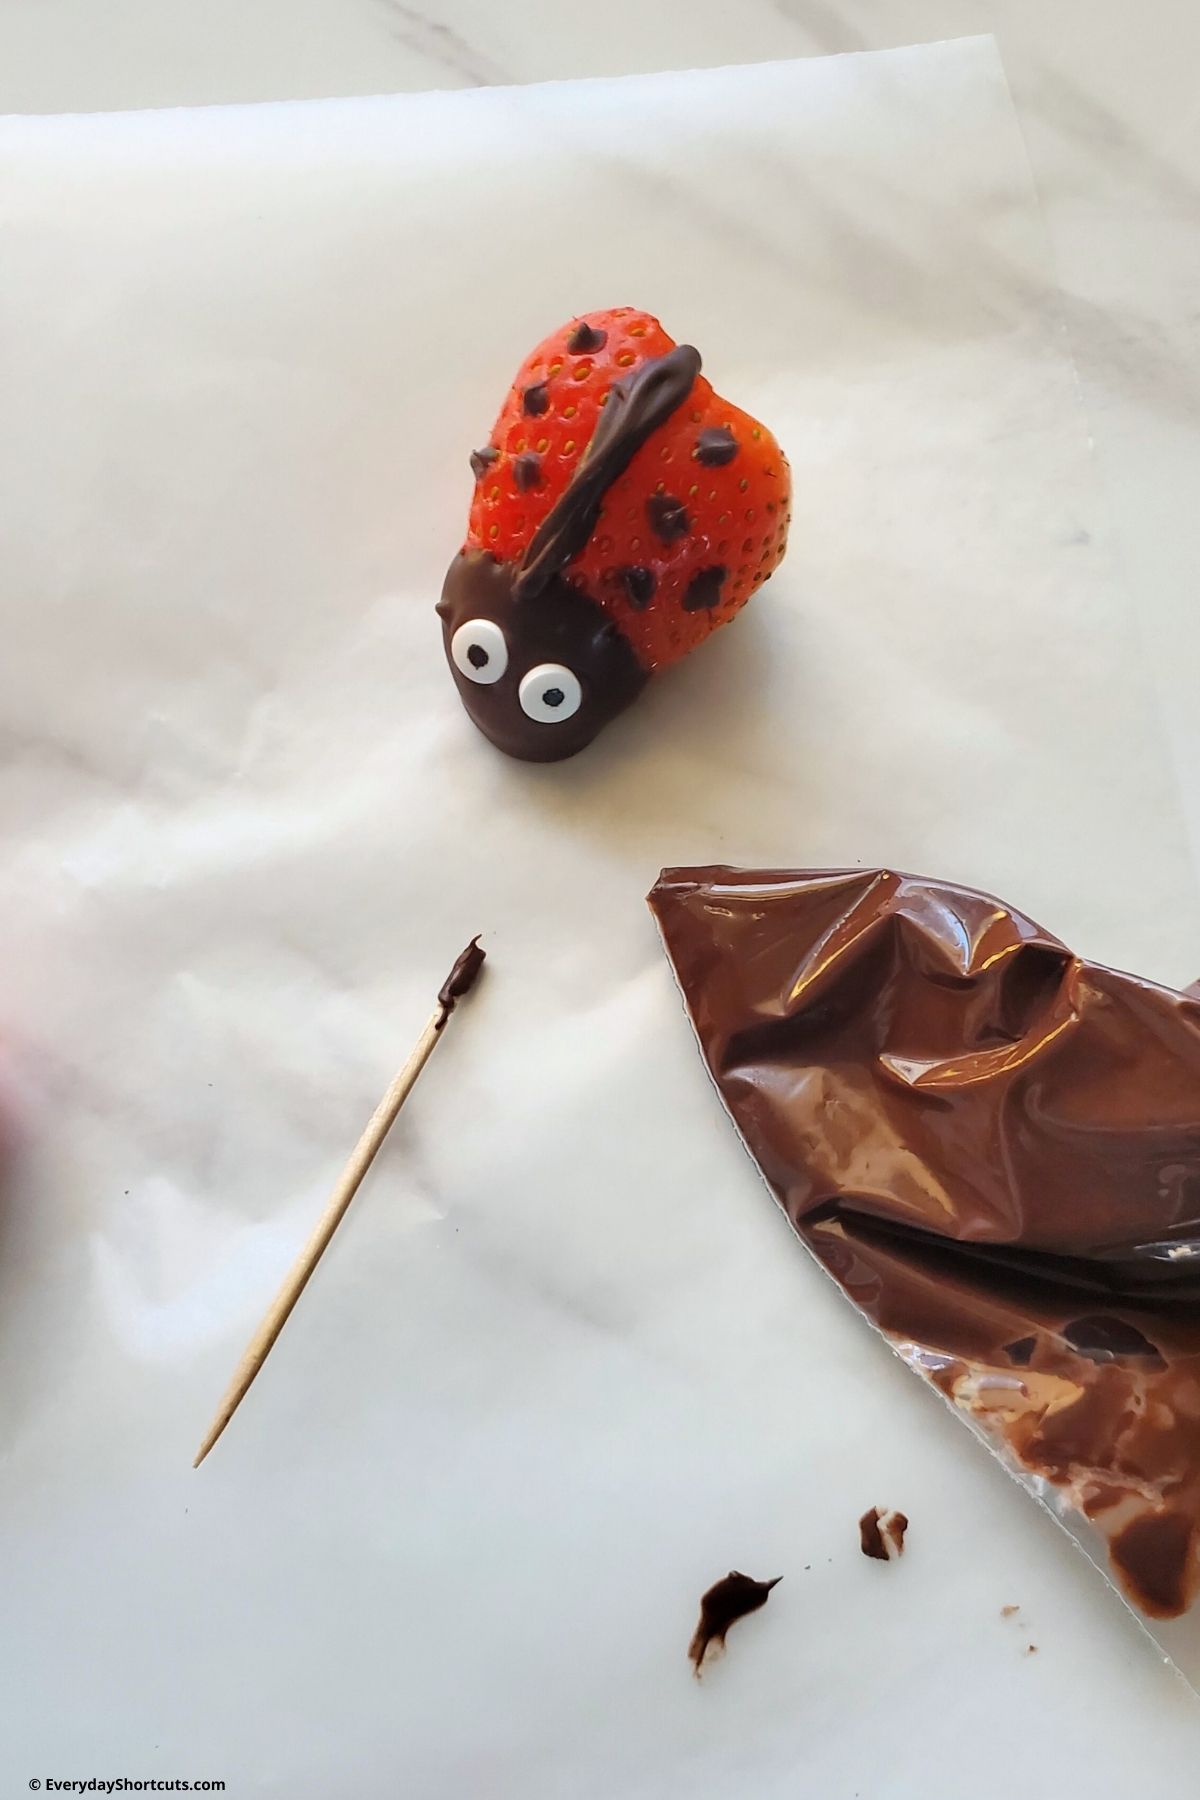 painted strawberry with chocolate to ladybug design